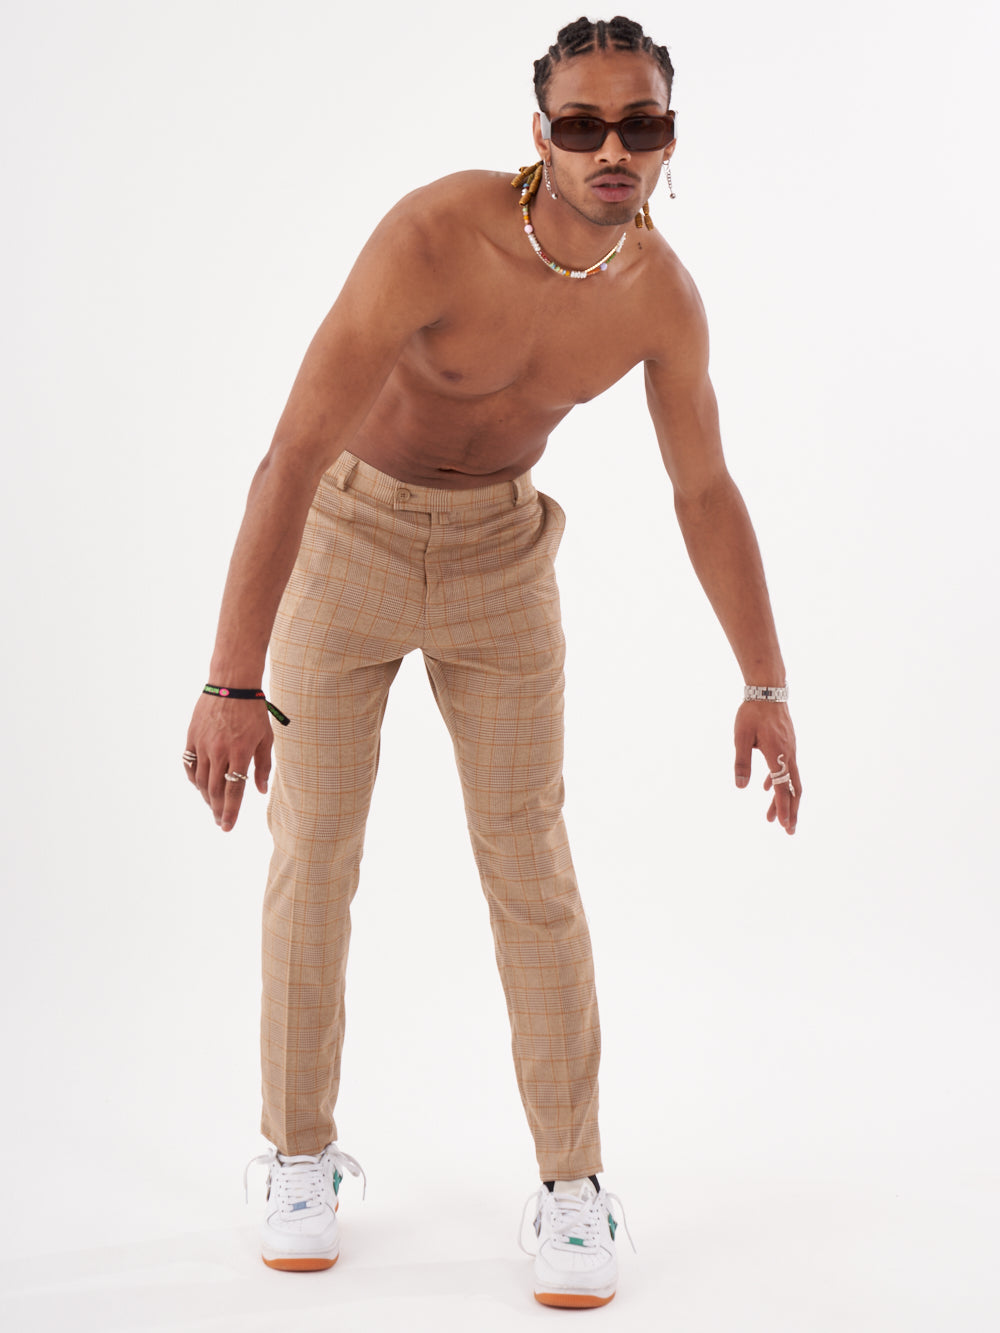 A man in a tan shirt and BAROT PANTS is posing in front of a white background.